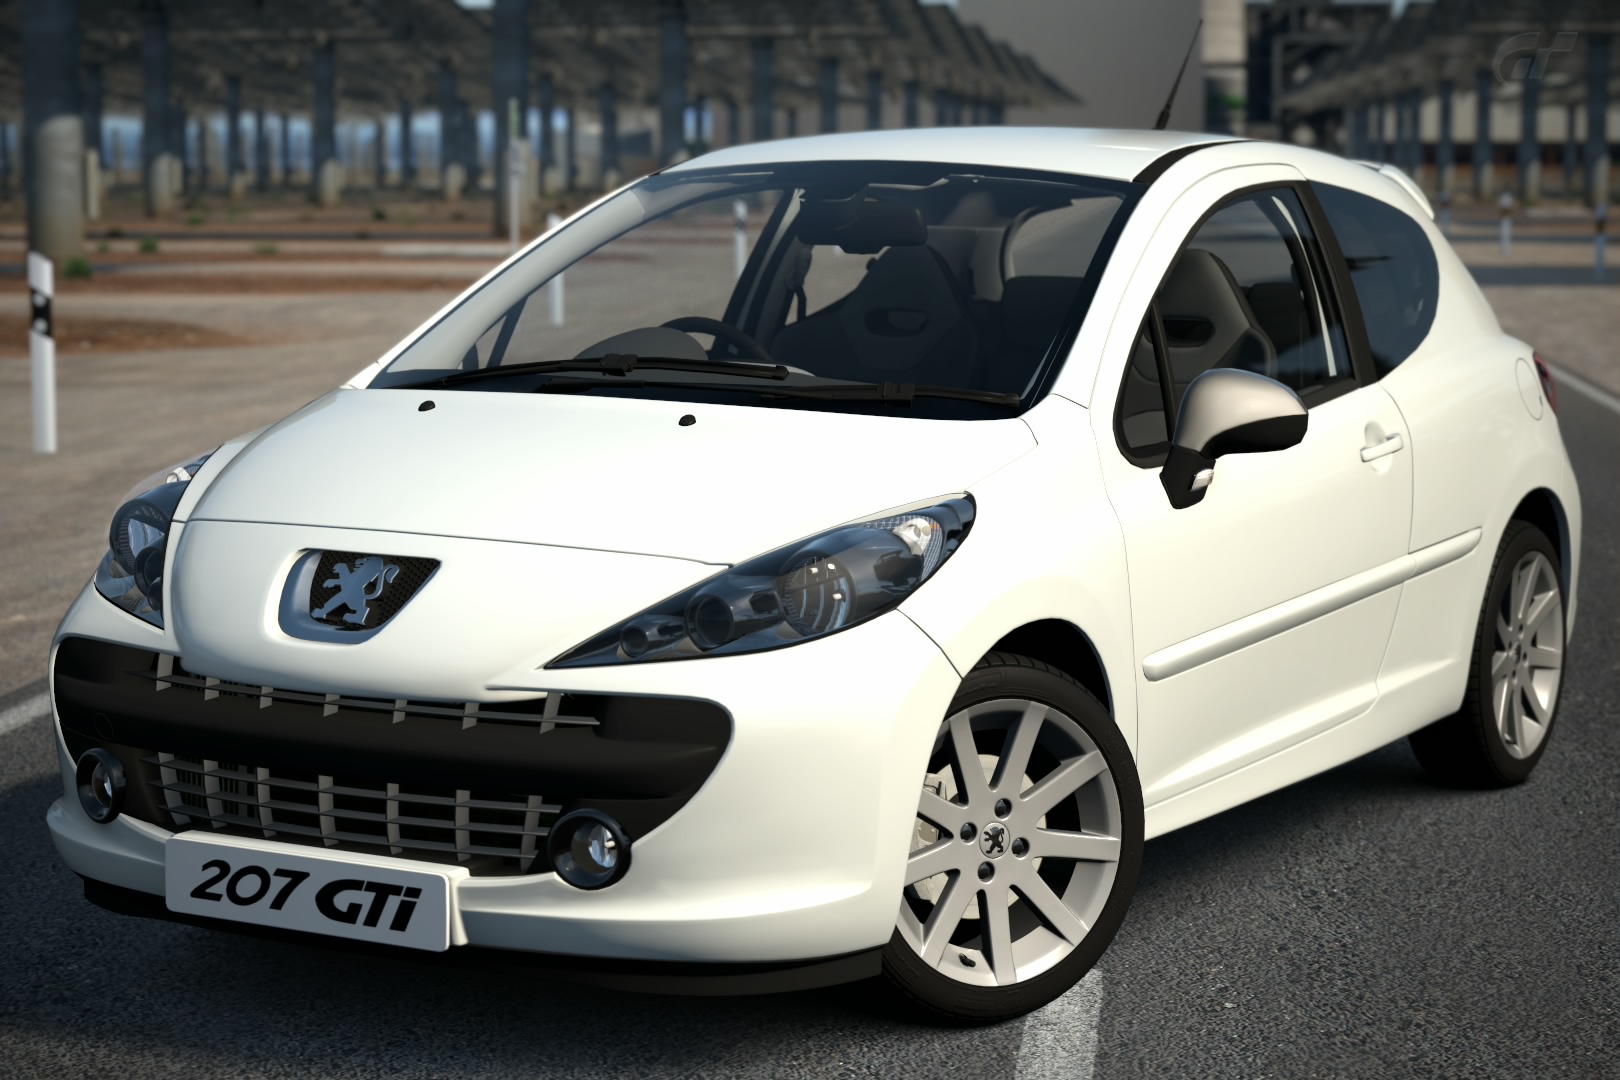 Peugeot 207 1.6 THP // The GTI's affordable cousin (GT / Sport XS) 